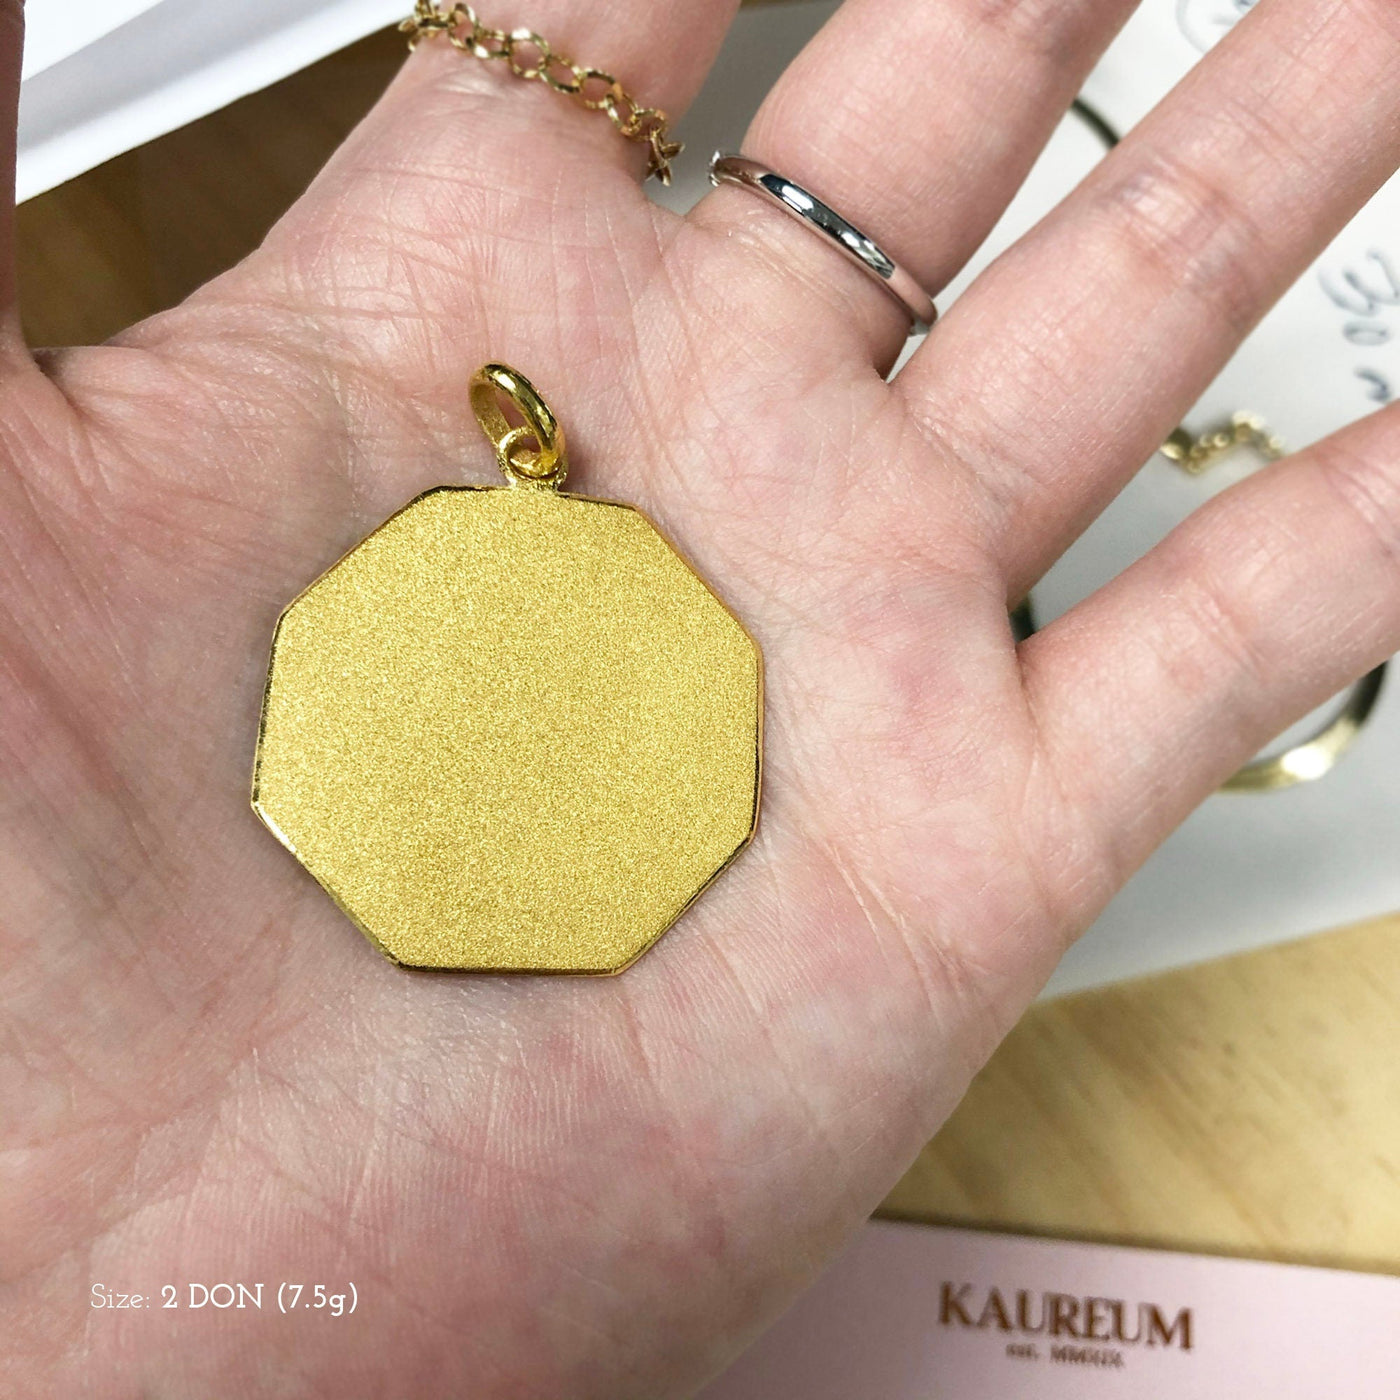 24K Octagon Charm (Complimentary Engraving)